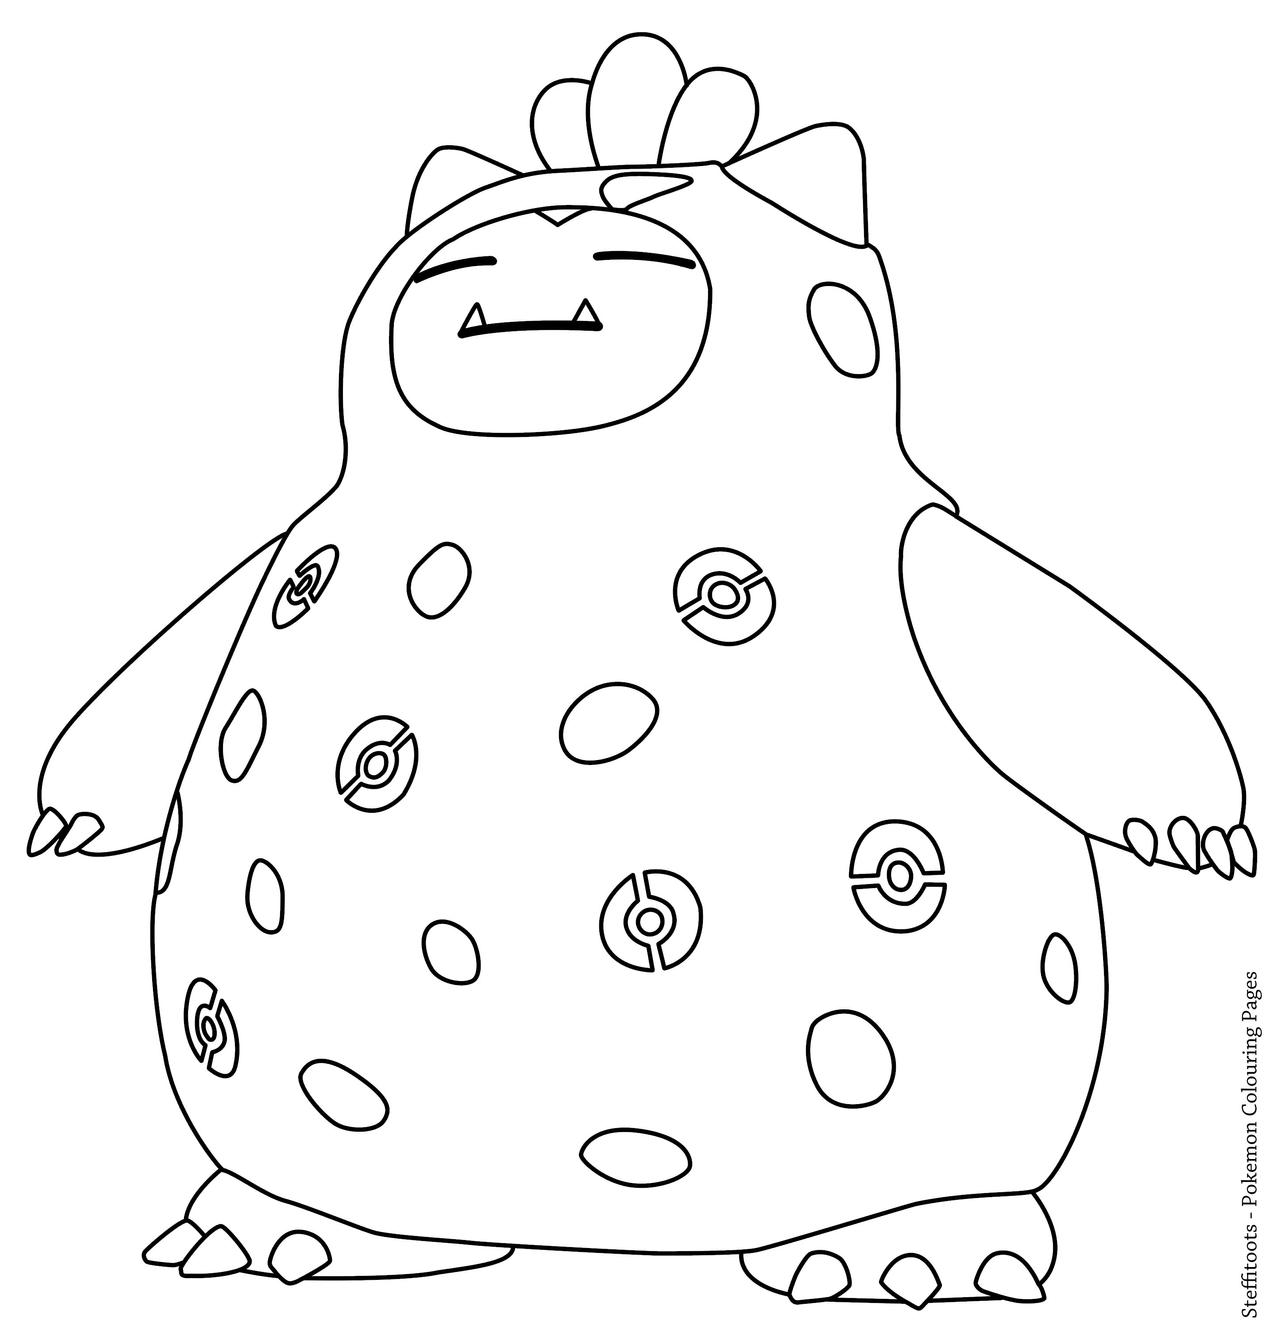 Snorlax dressed in a sitrus berry costume by steffitoots on